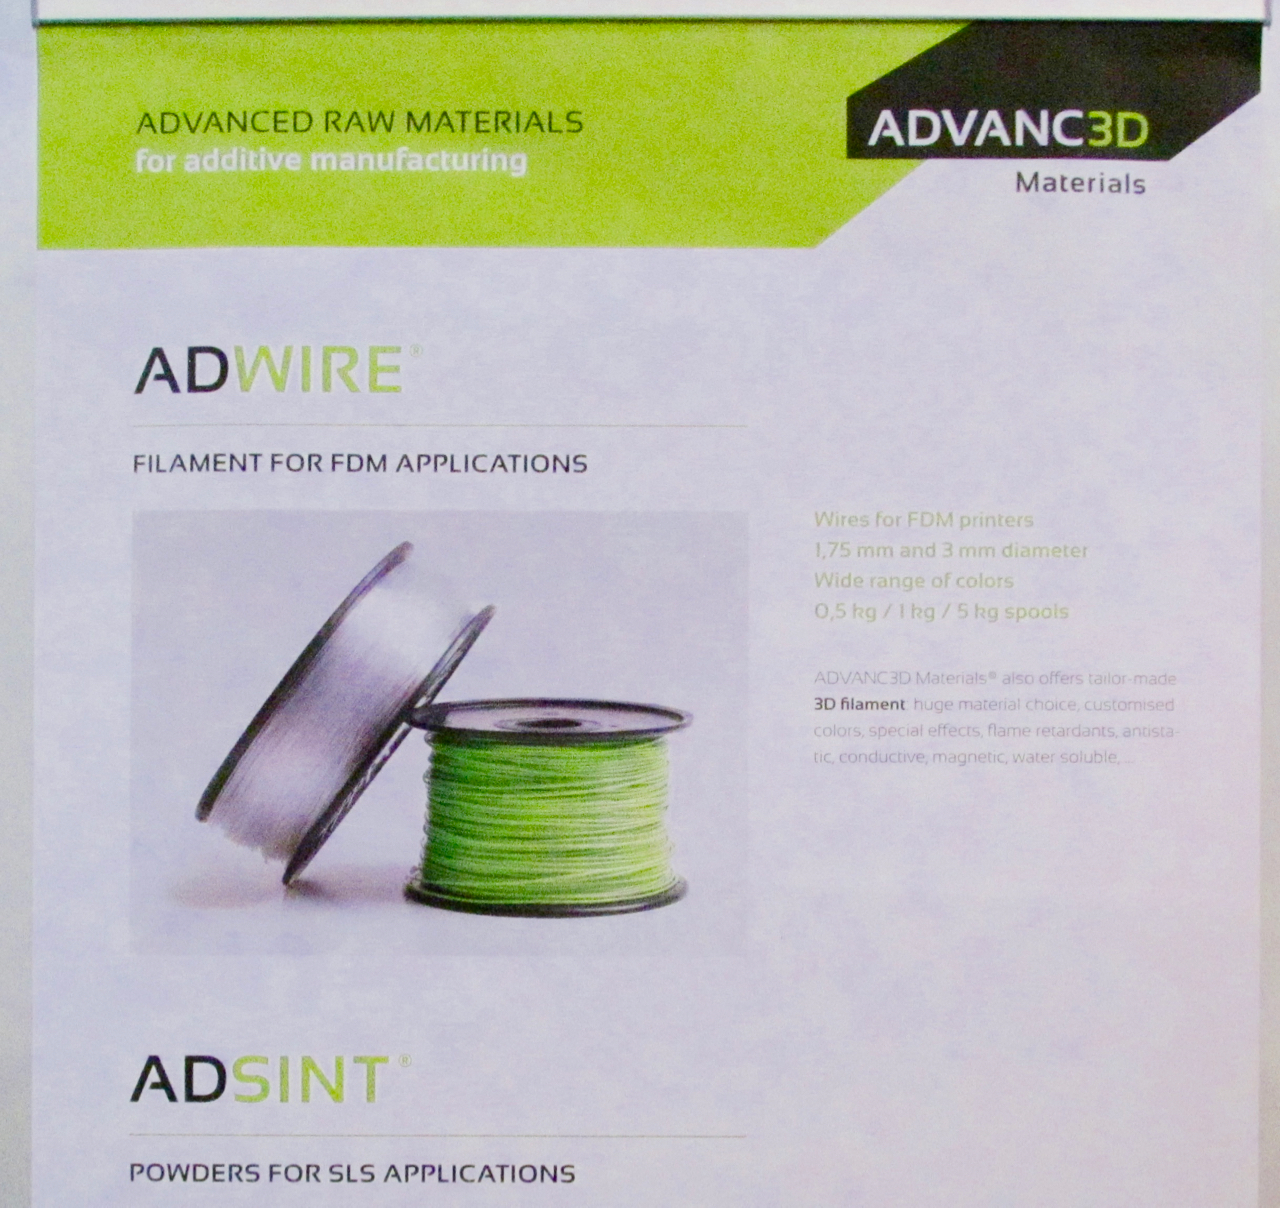  Some of ADVANC3D Materials' products 